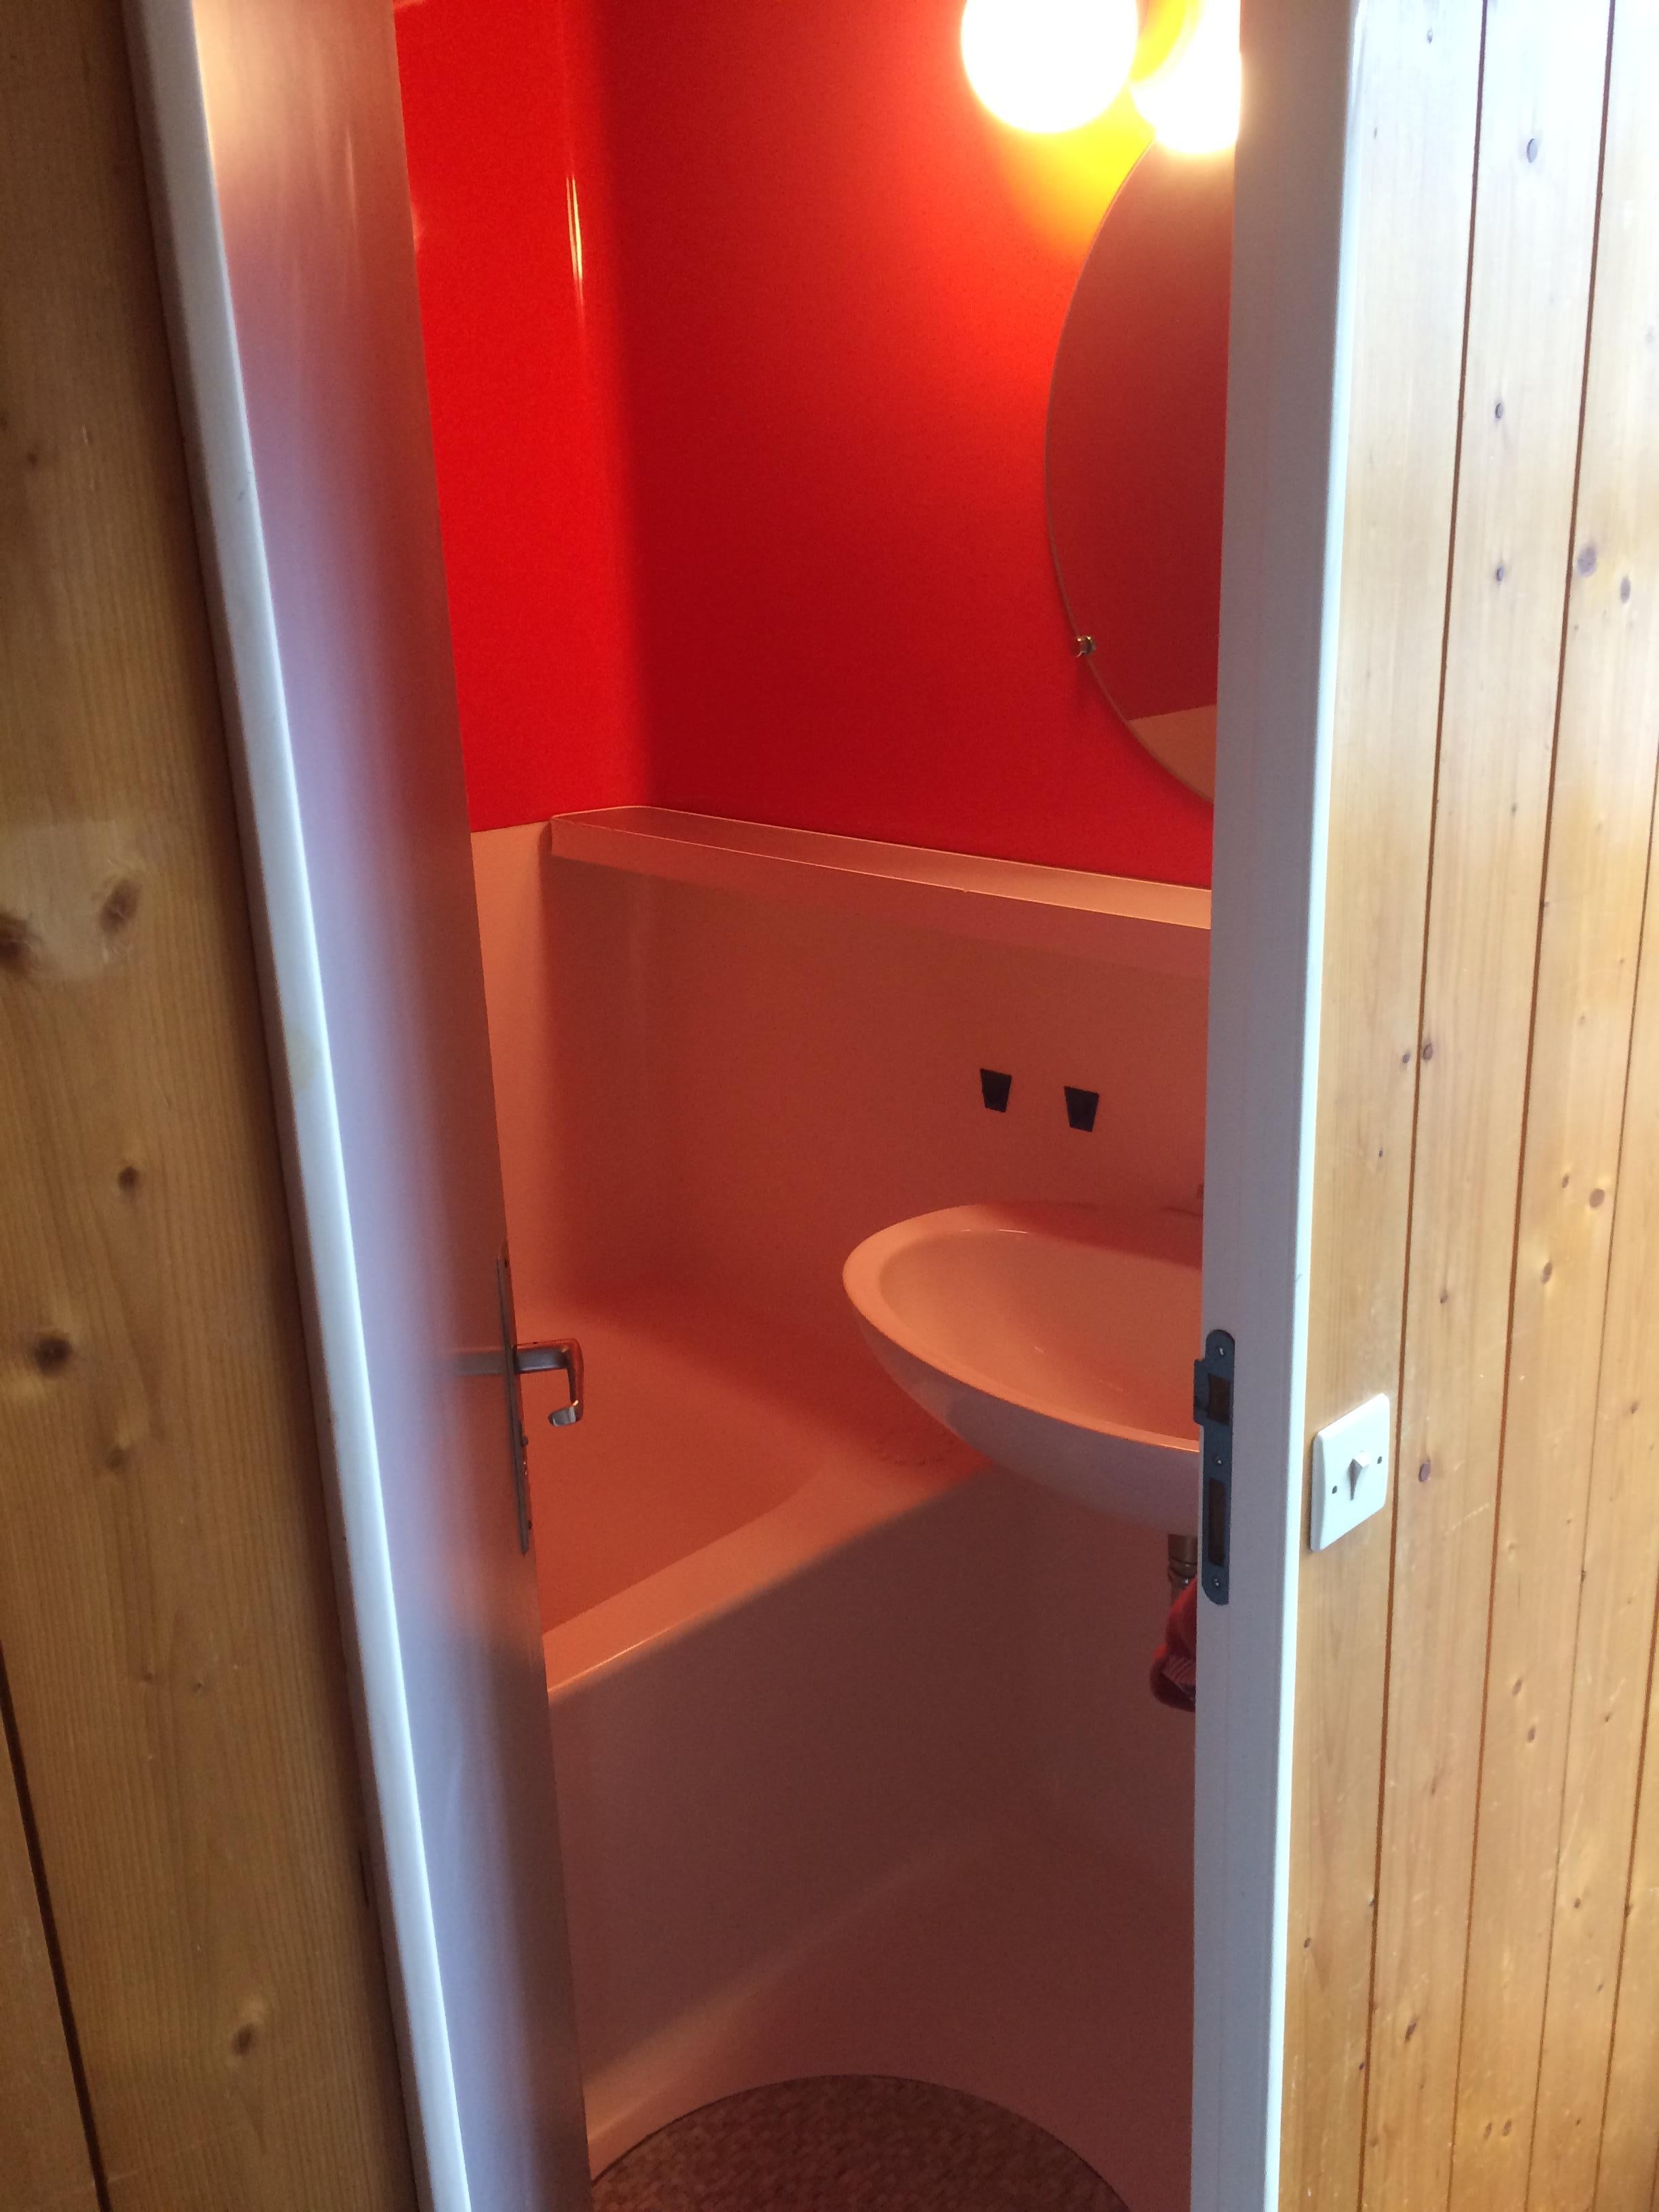 Polychromed 8 Charlotte Perriand Bath Cabin Units, Les Arcs, Savoy, France, 1975 For Sale